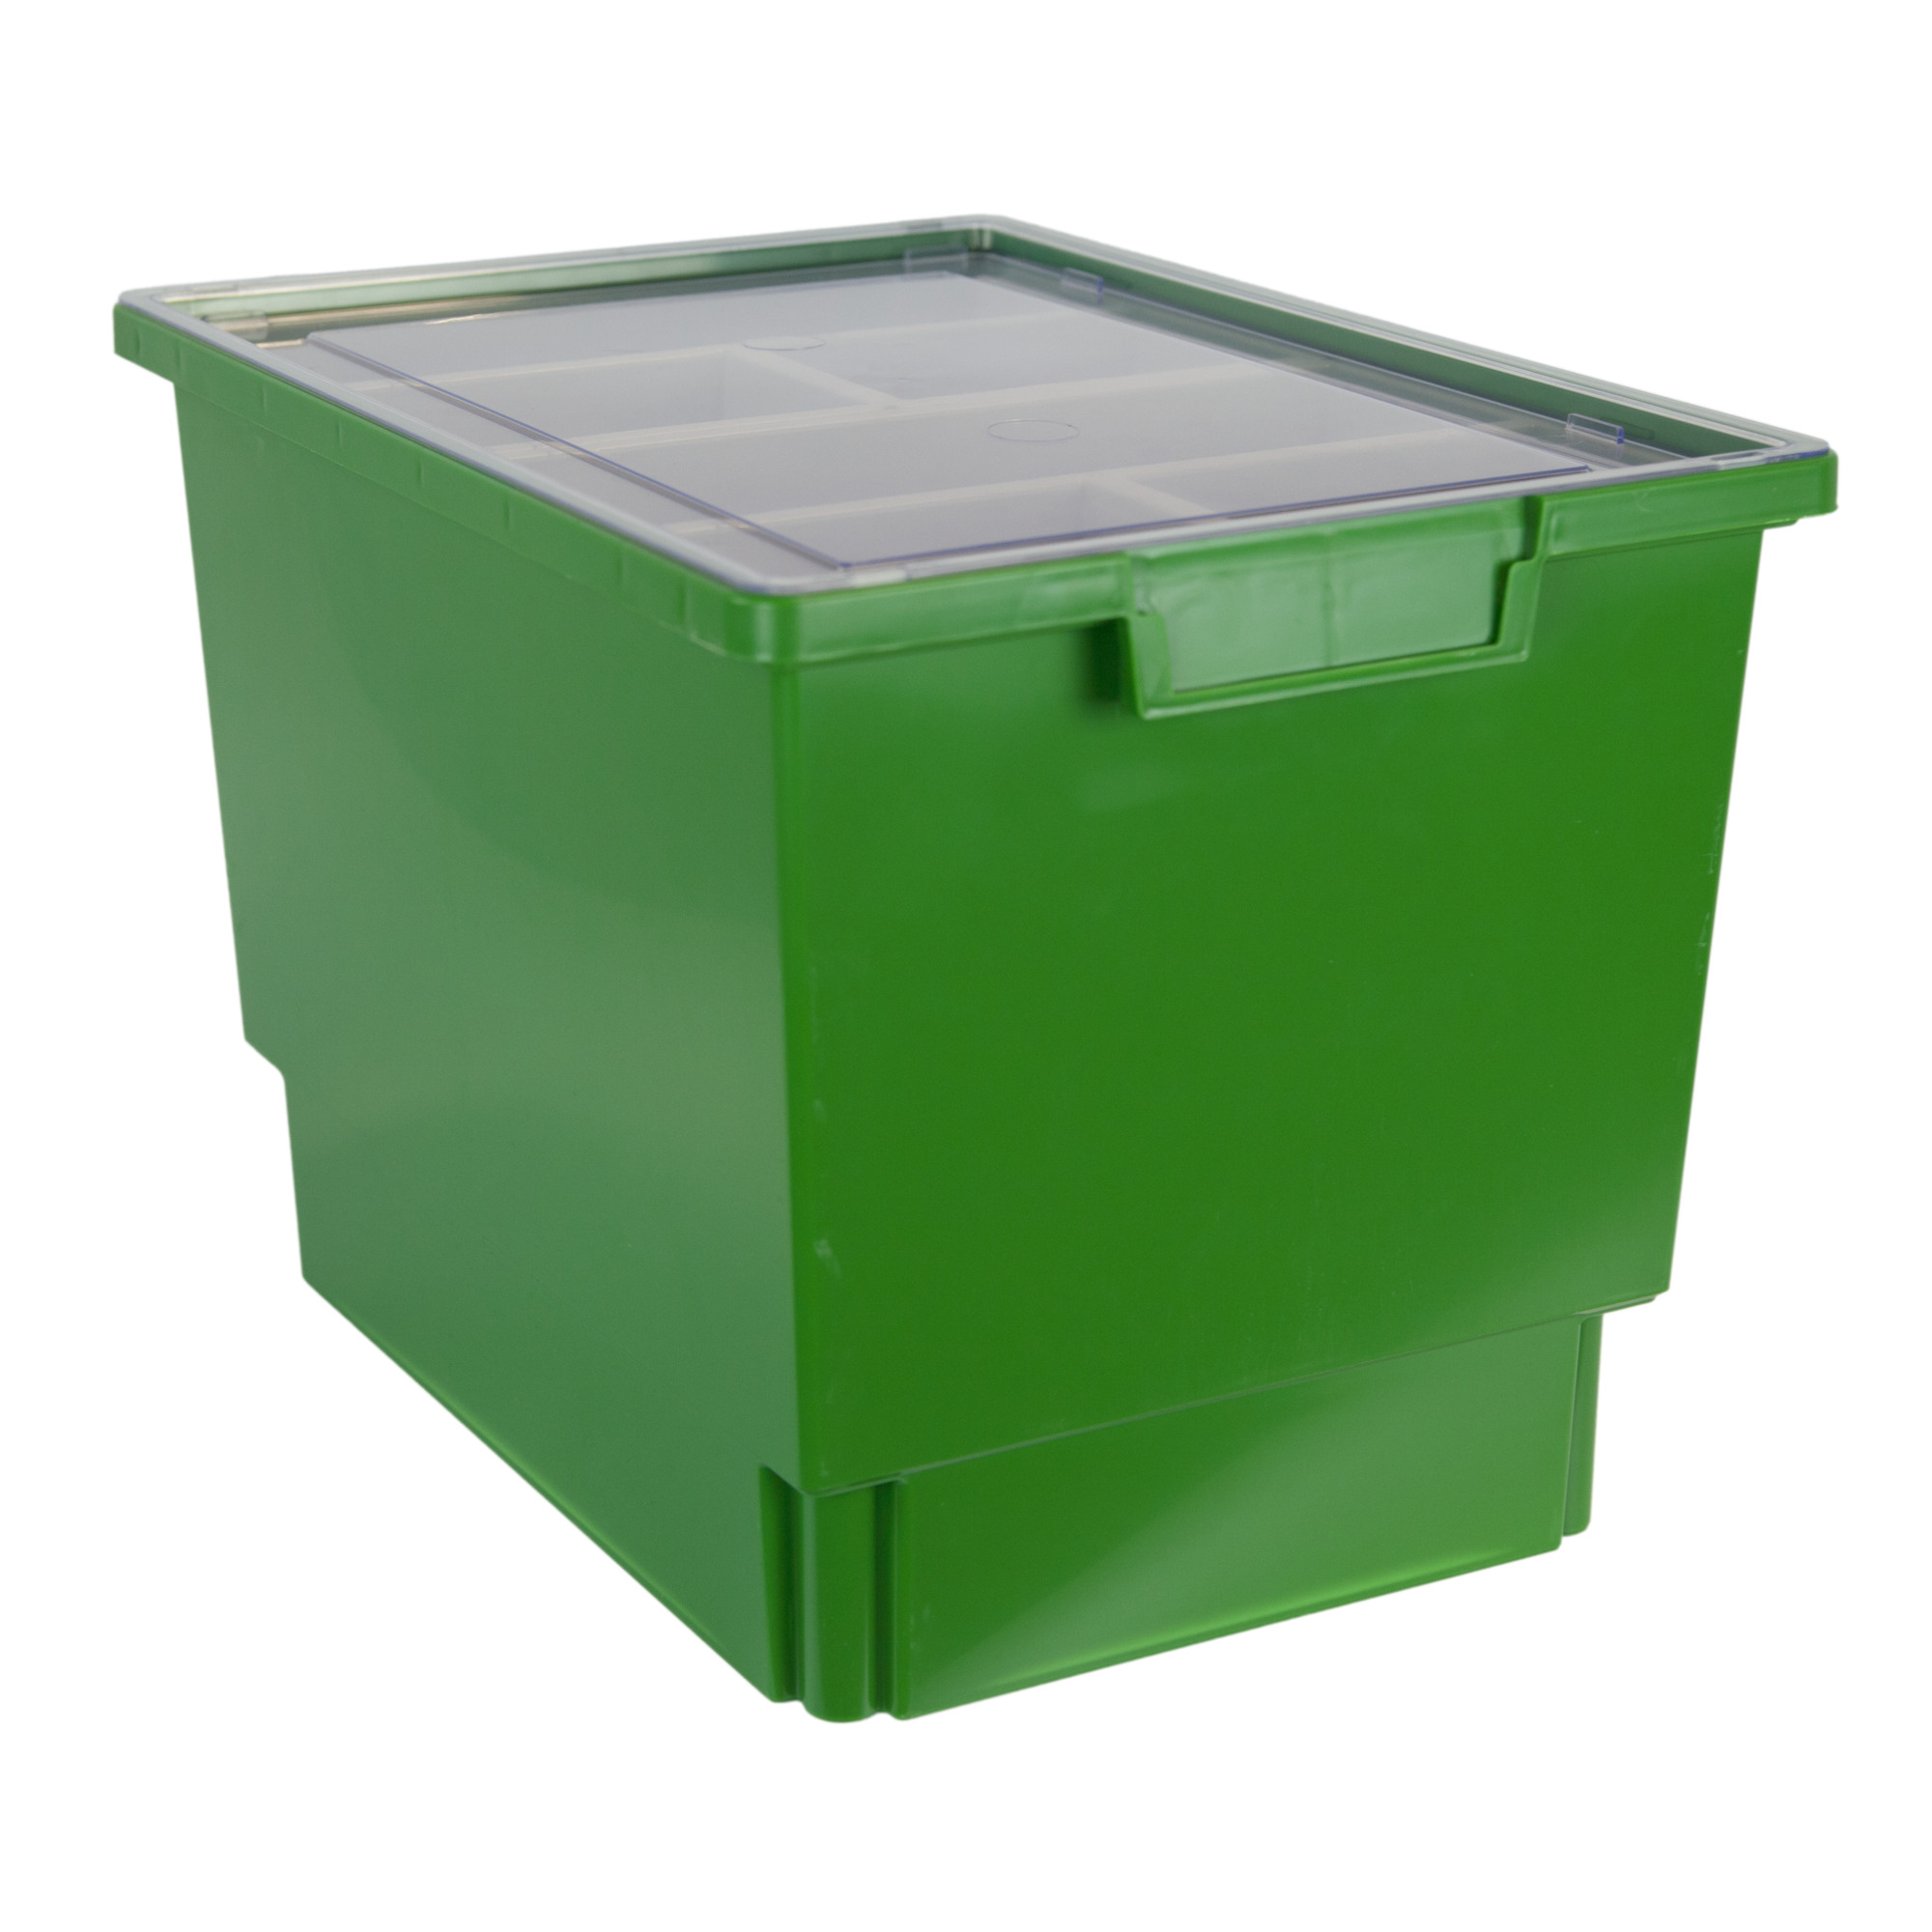 Certwood StorWerks, Slim Line 12Inch Tray Kit (3 x Divisions) Green, Included (qty.) 1, Material Plastic, Height 12 in, Model CE1954PG-NK0202-1